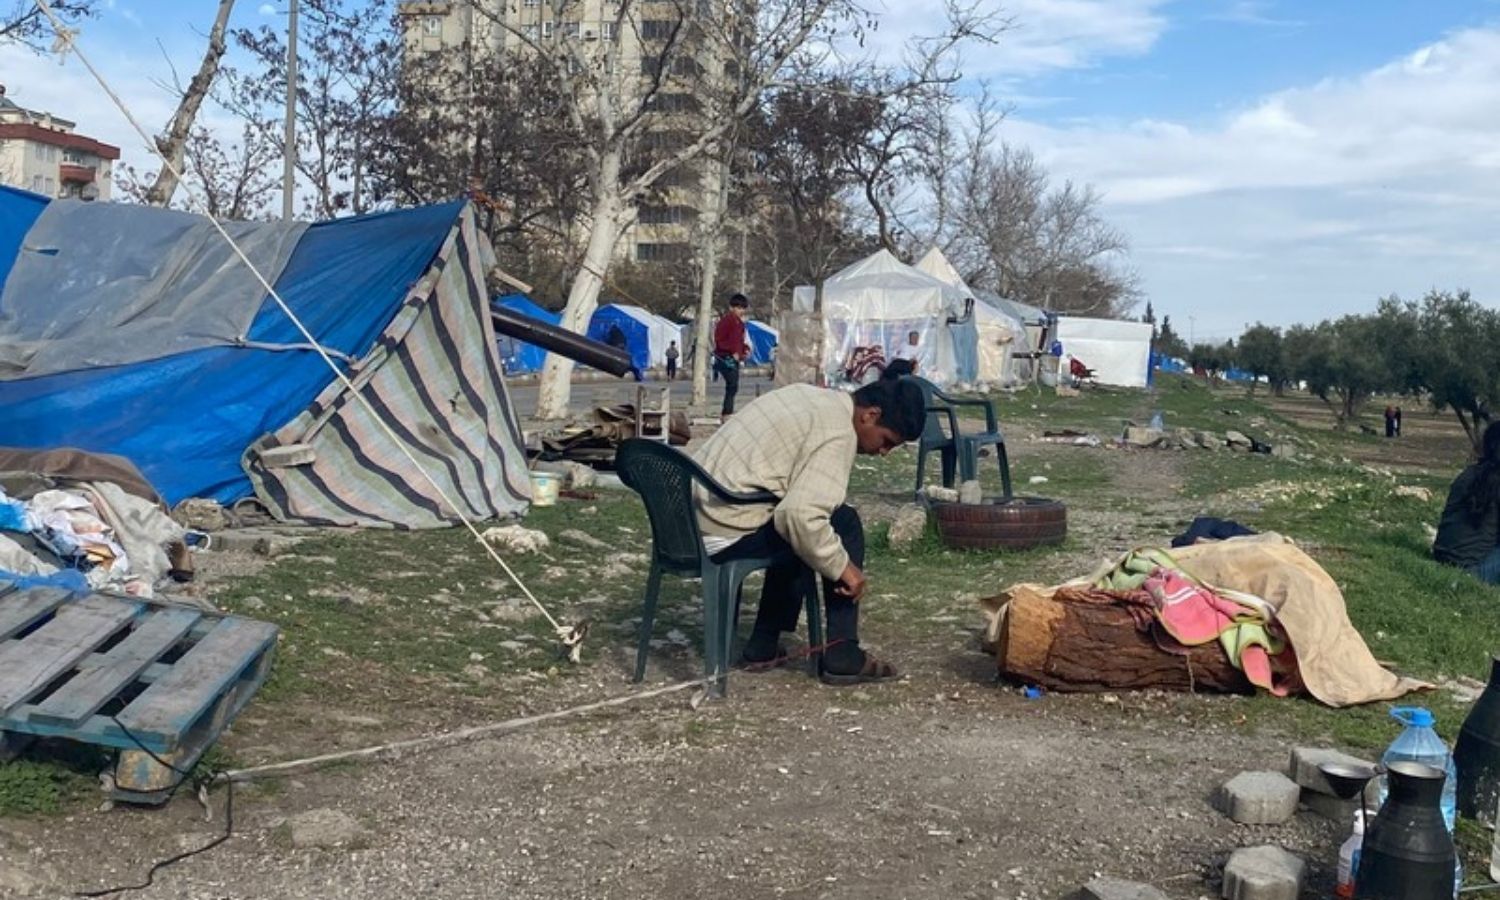 A child suffering from a mental health condition is restrained by his foot outside his family's tent at an unofficial displacement site in Turkey - March 2023 (Amnesty International)